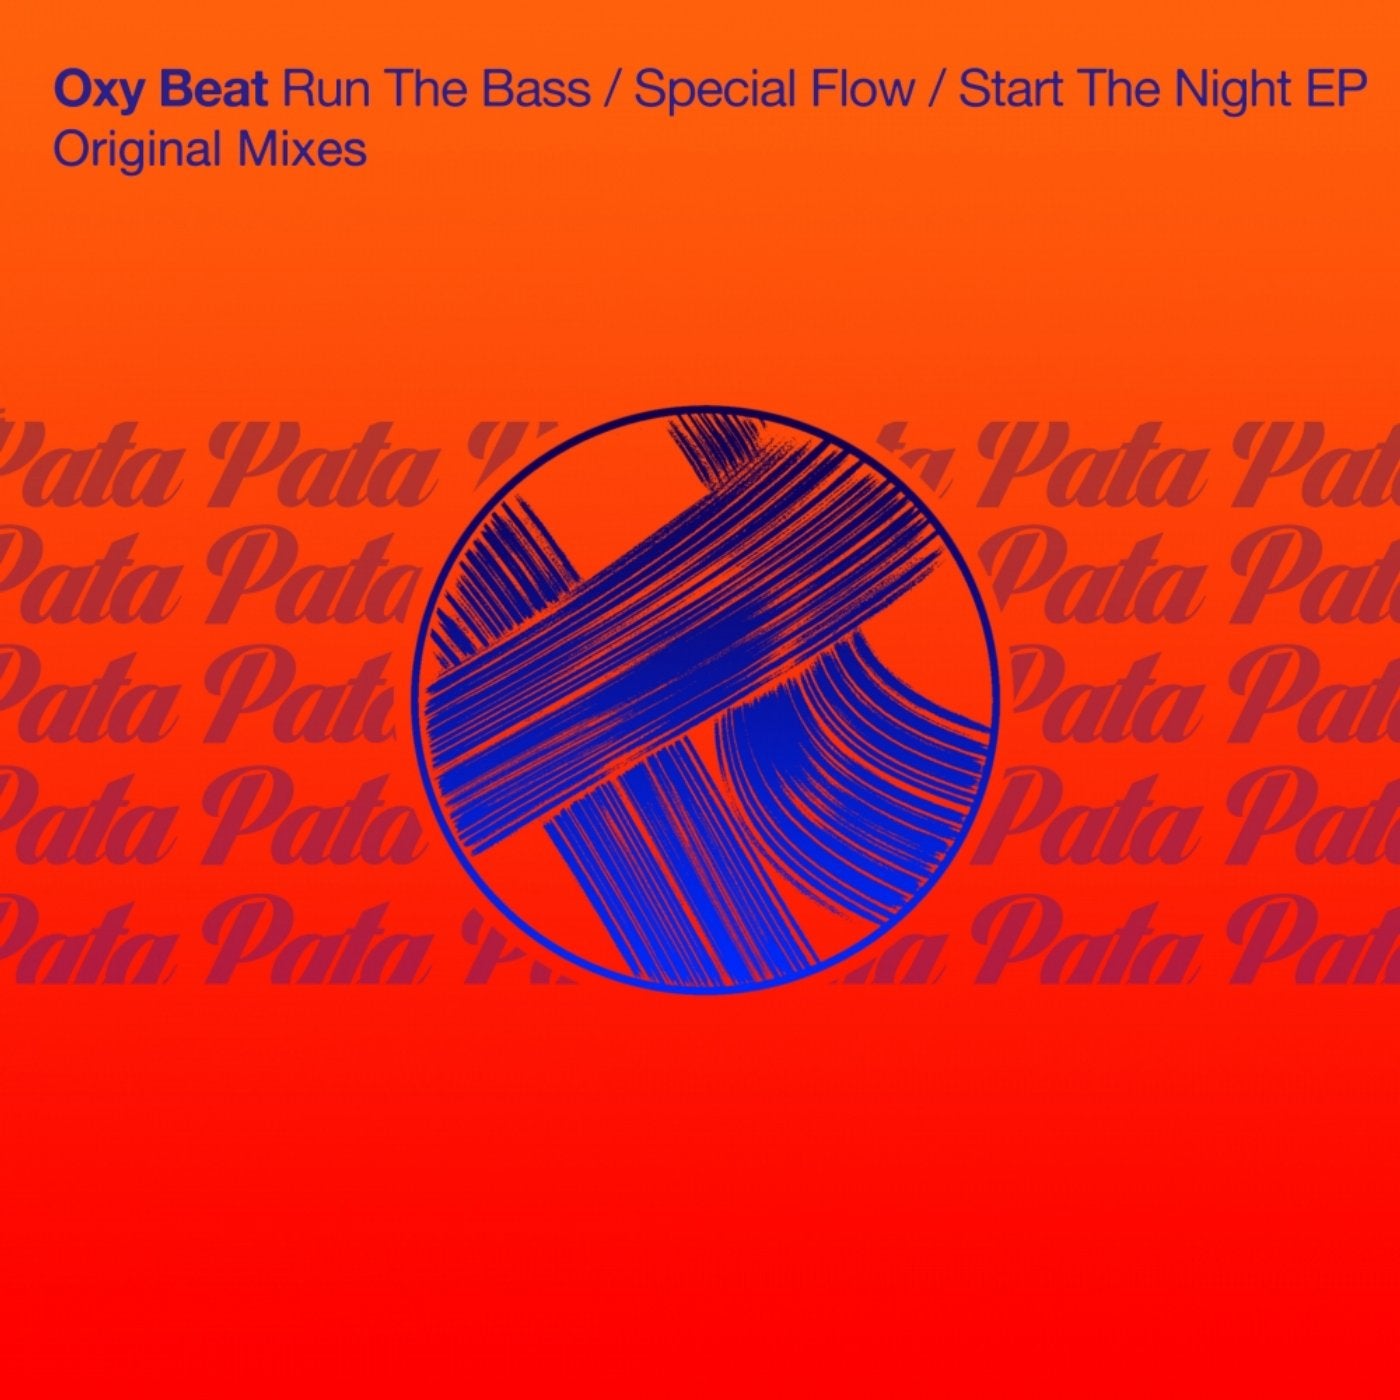 Run The Bass / Special Flow / Start The Night EP